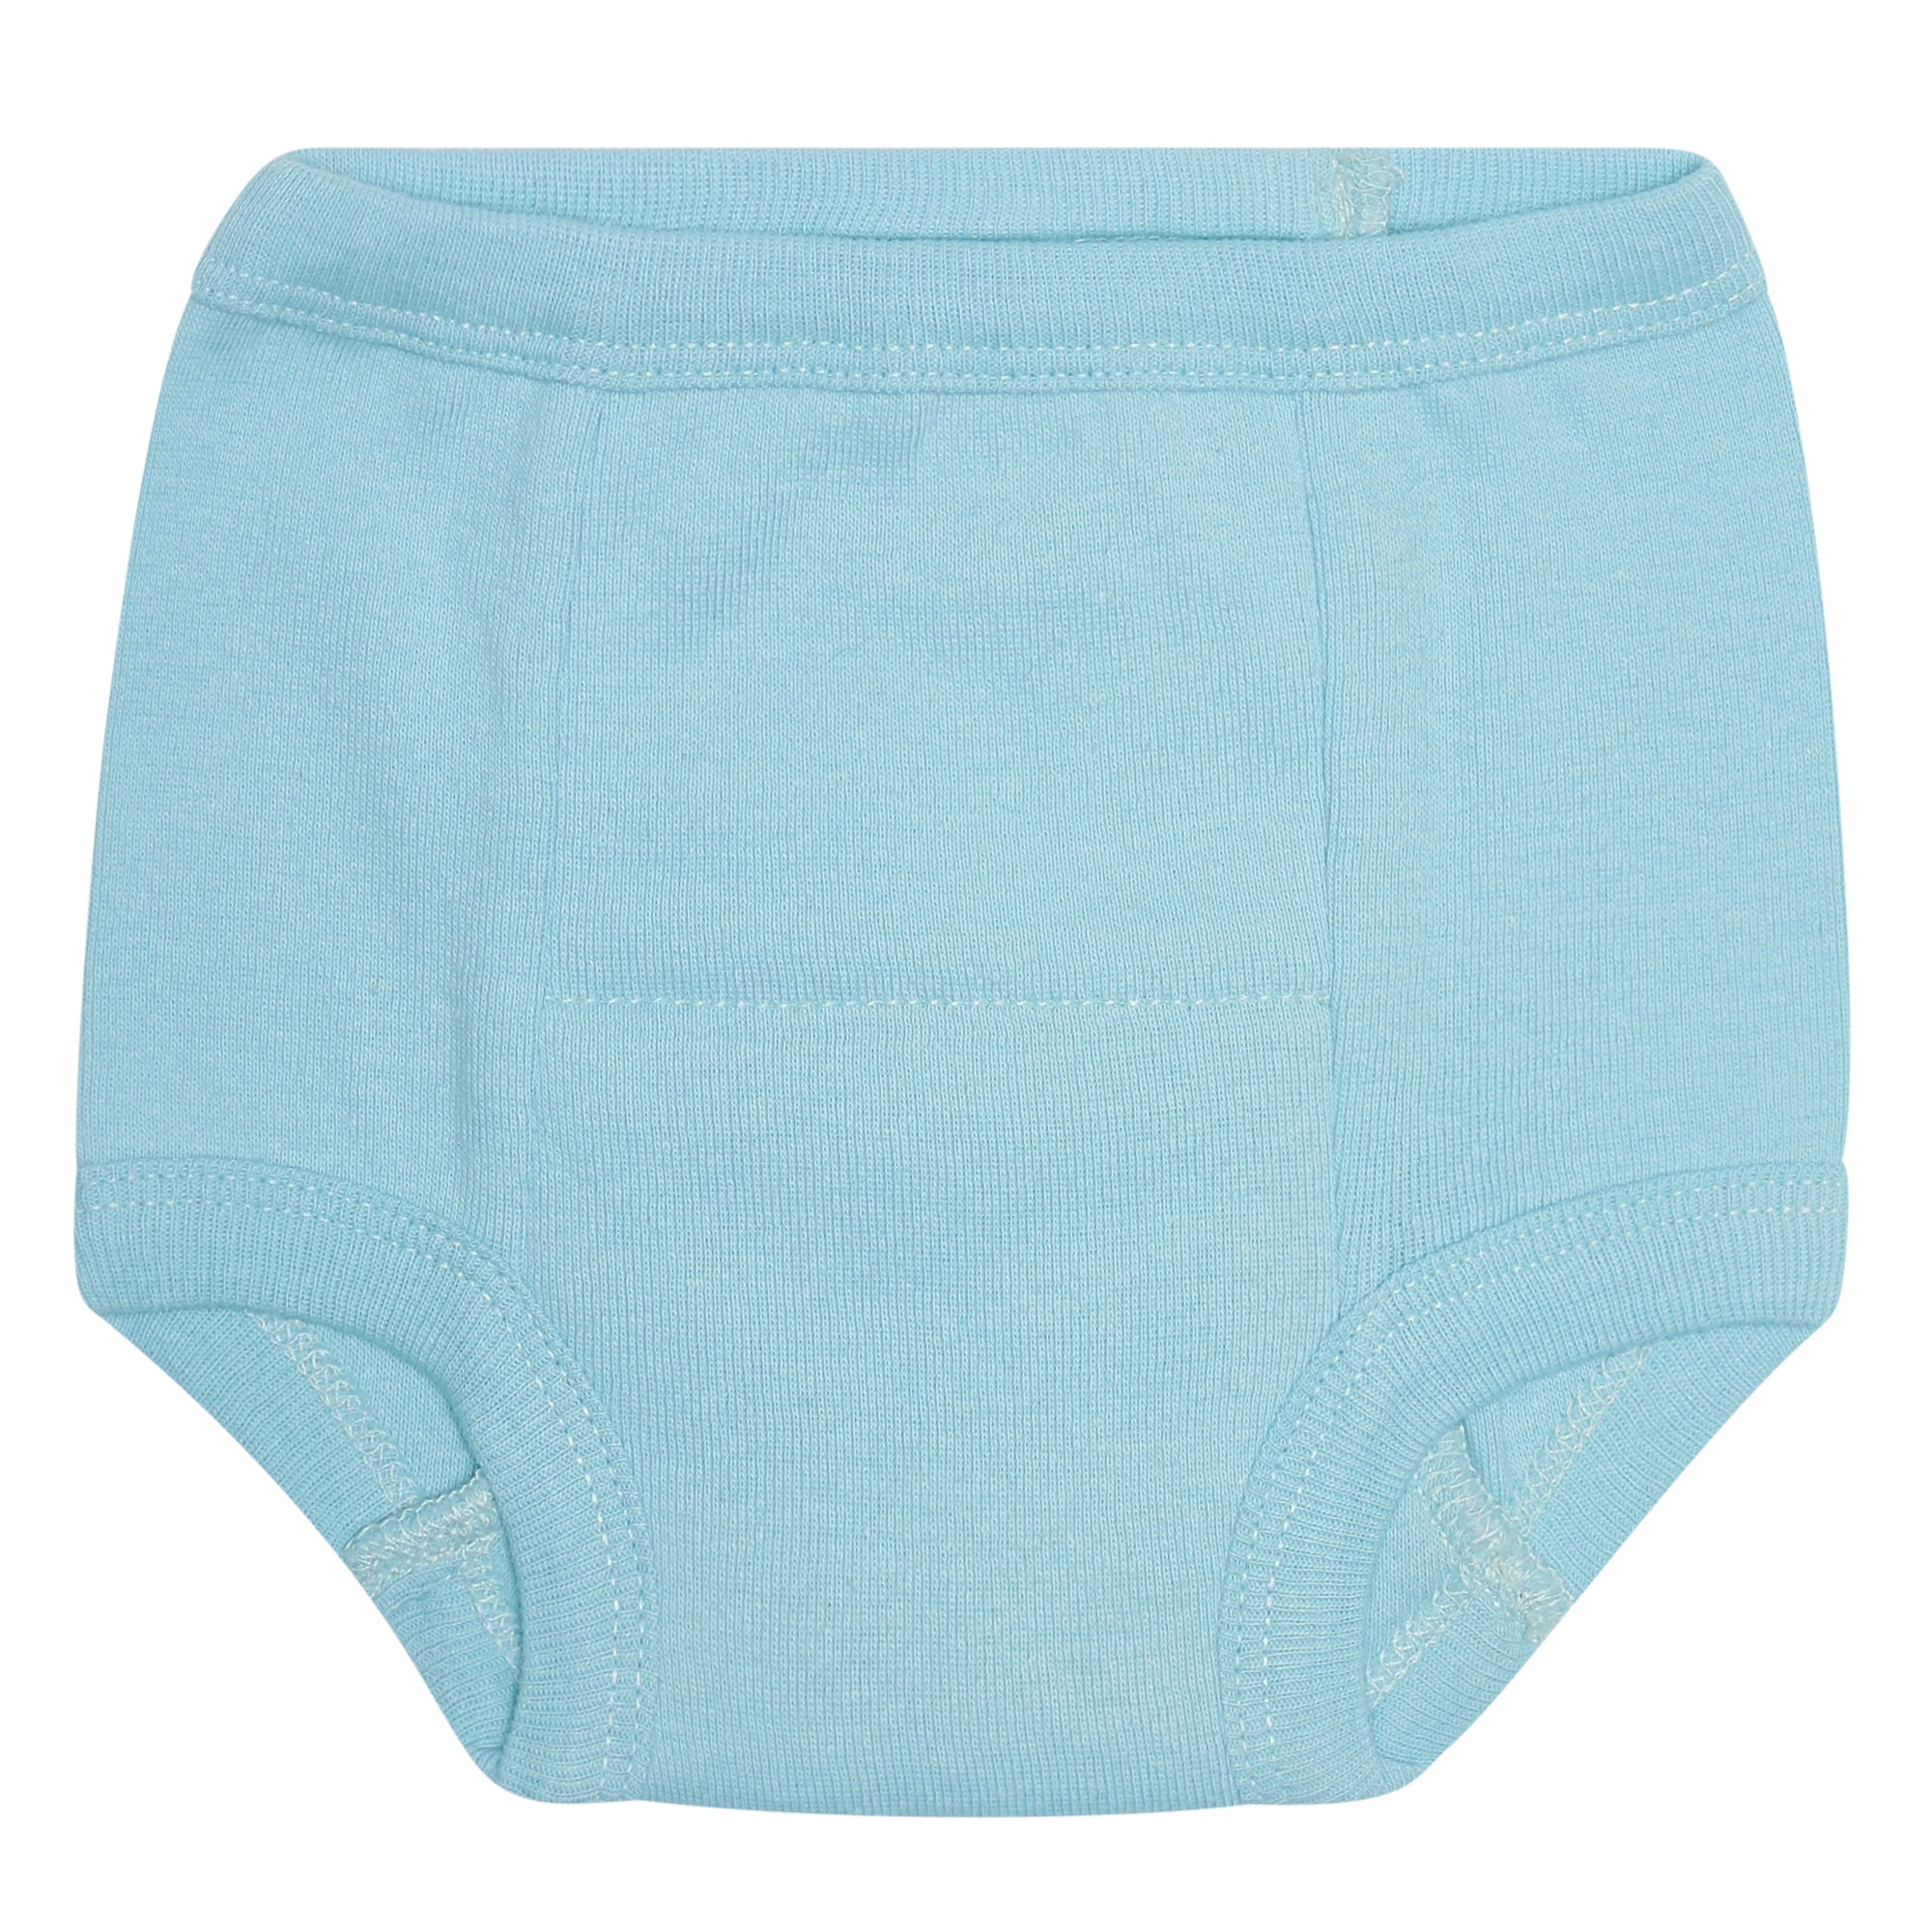 Everyday Kids 7 Pack Potty Training Underwear for Toddler Boys